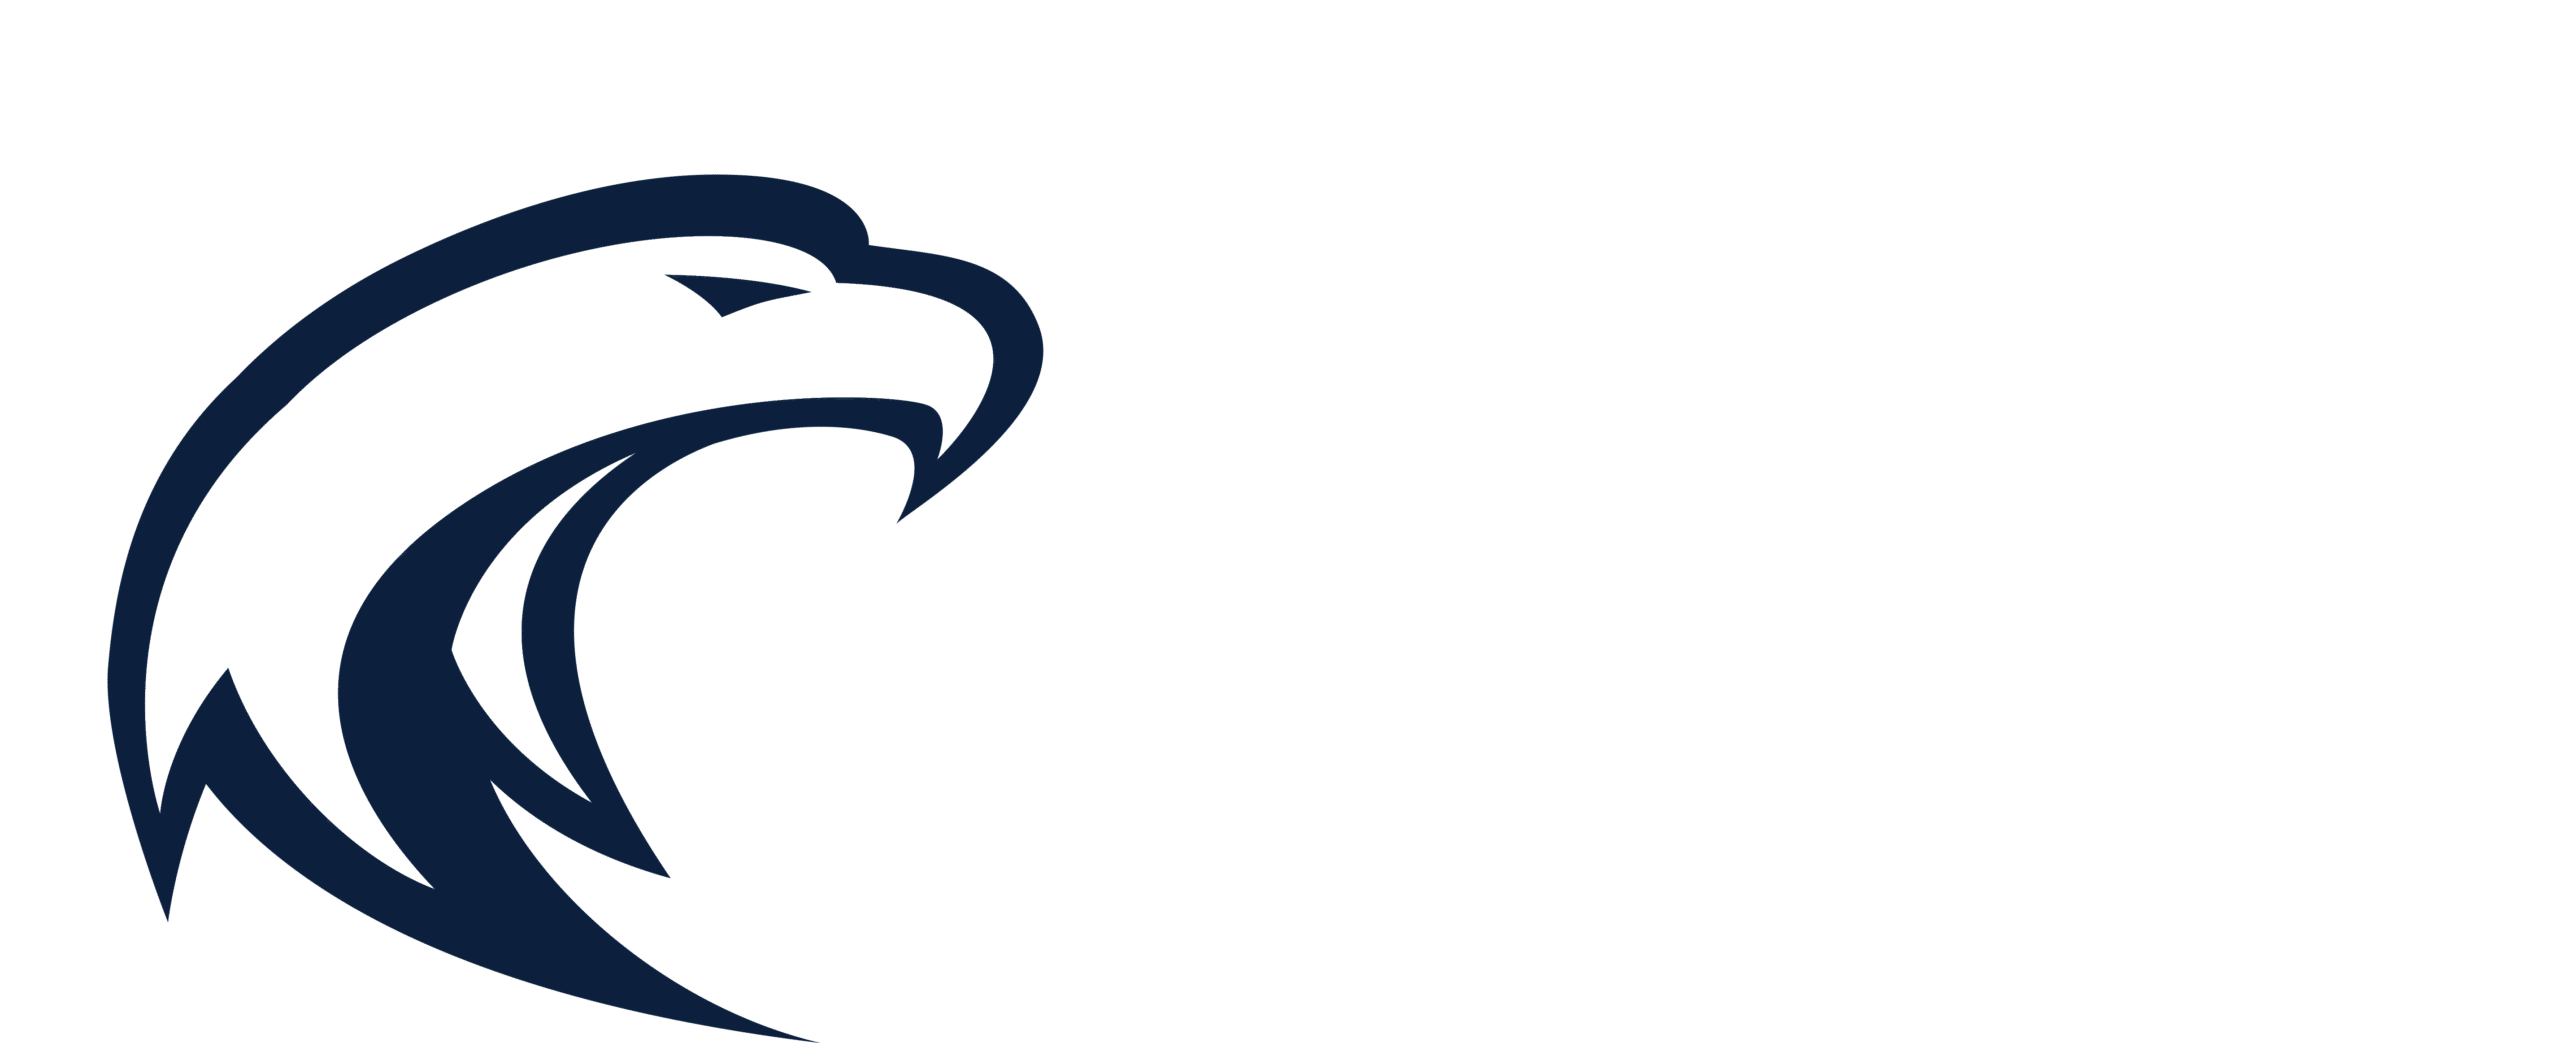 USA Strapping